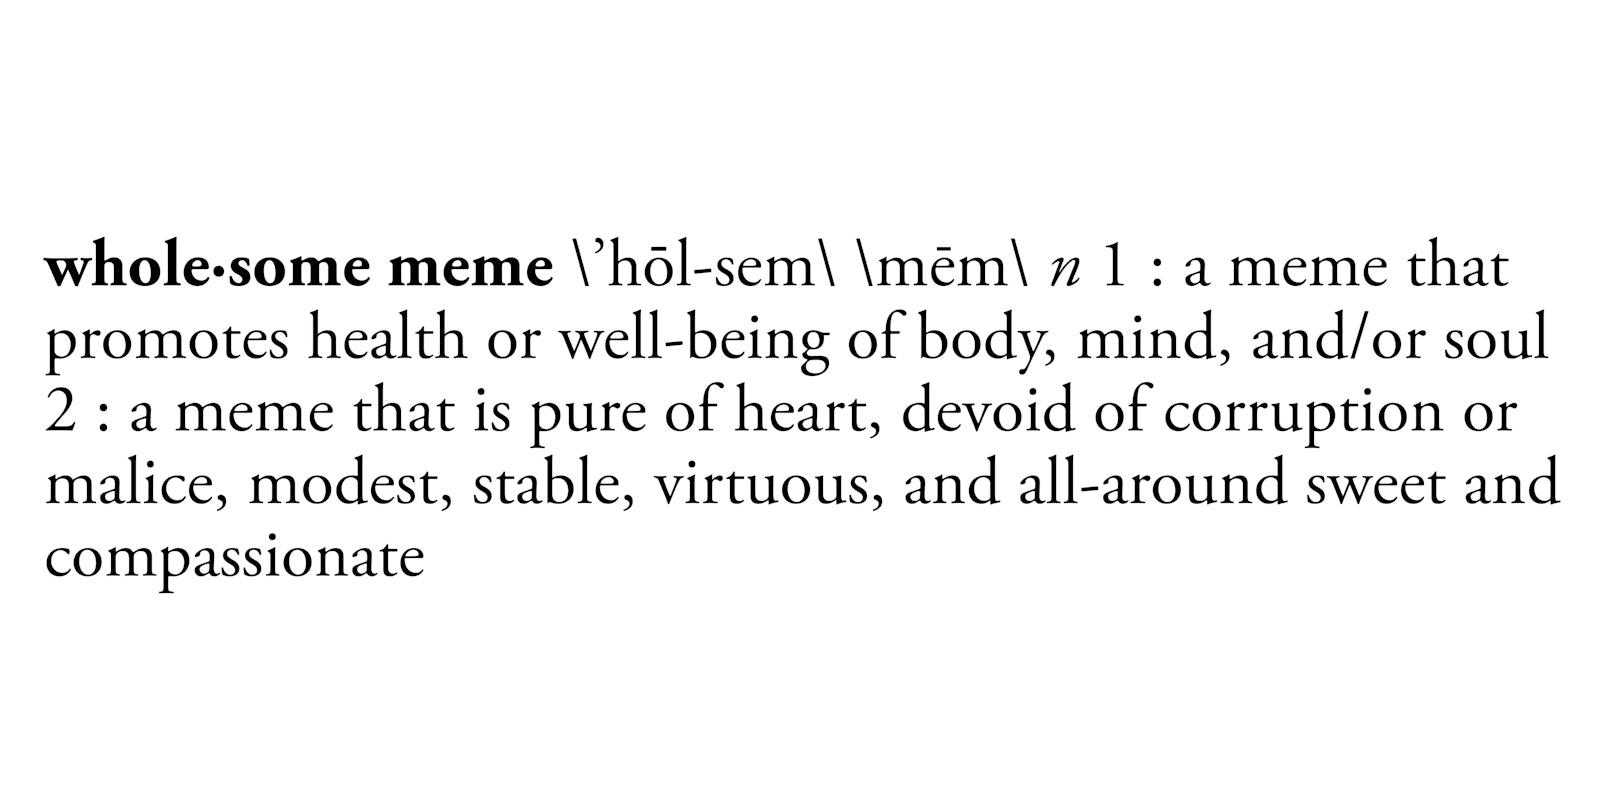 Wholesome meme dictionary definition